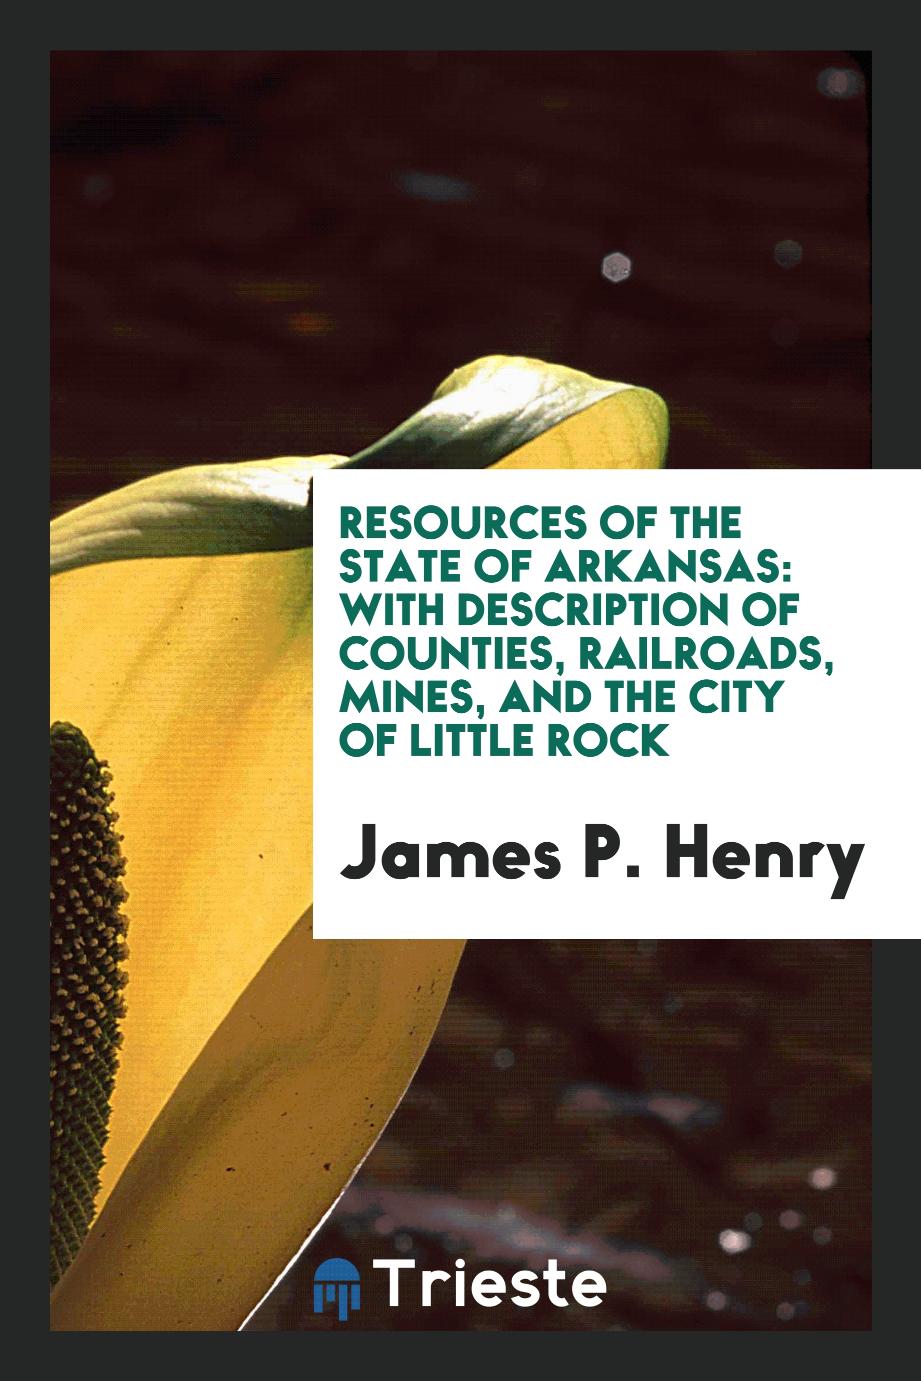 Resources of the State of Arkansas: With Description of Counties, Railroads, Mines, and the City of Little Rock